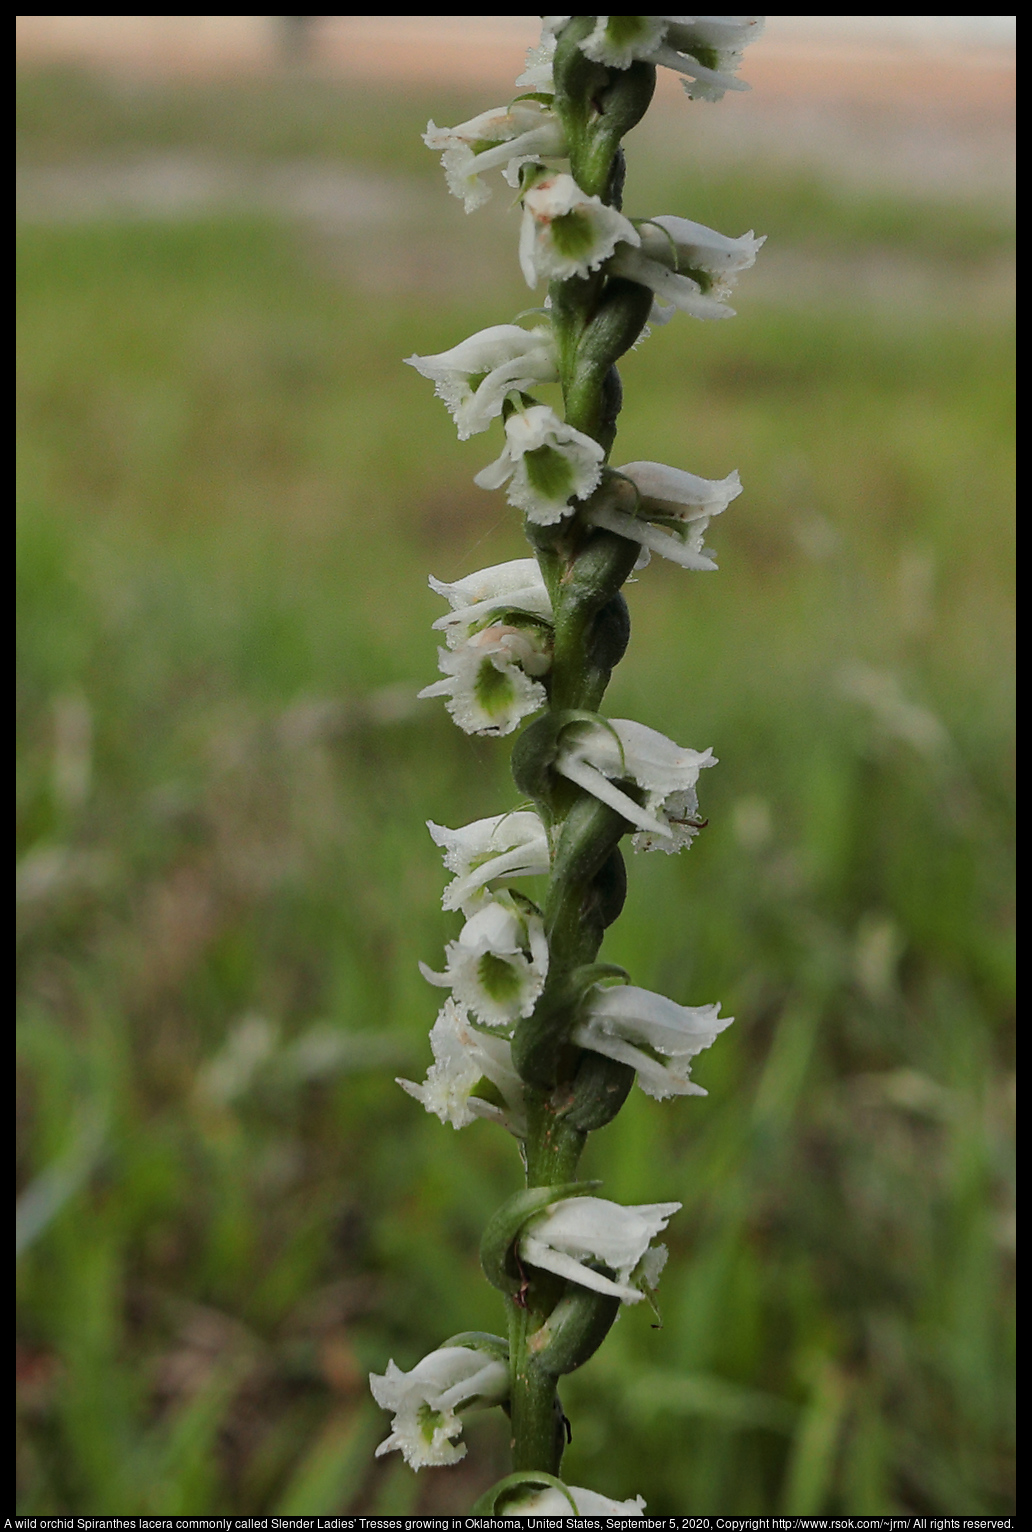 A wild orchid Spiranthes lacera commonly called Slender Ladies's Tresses growing in Oklahoma, United States, September 5, 2020